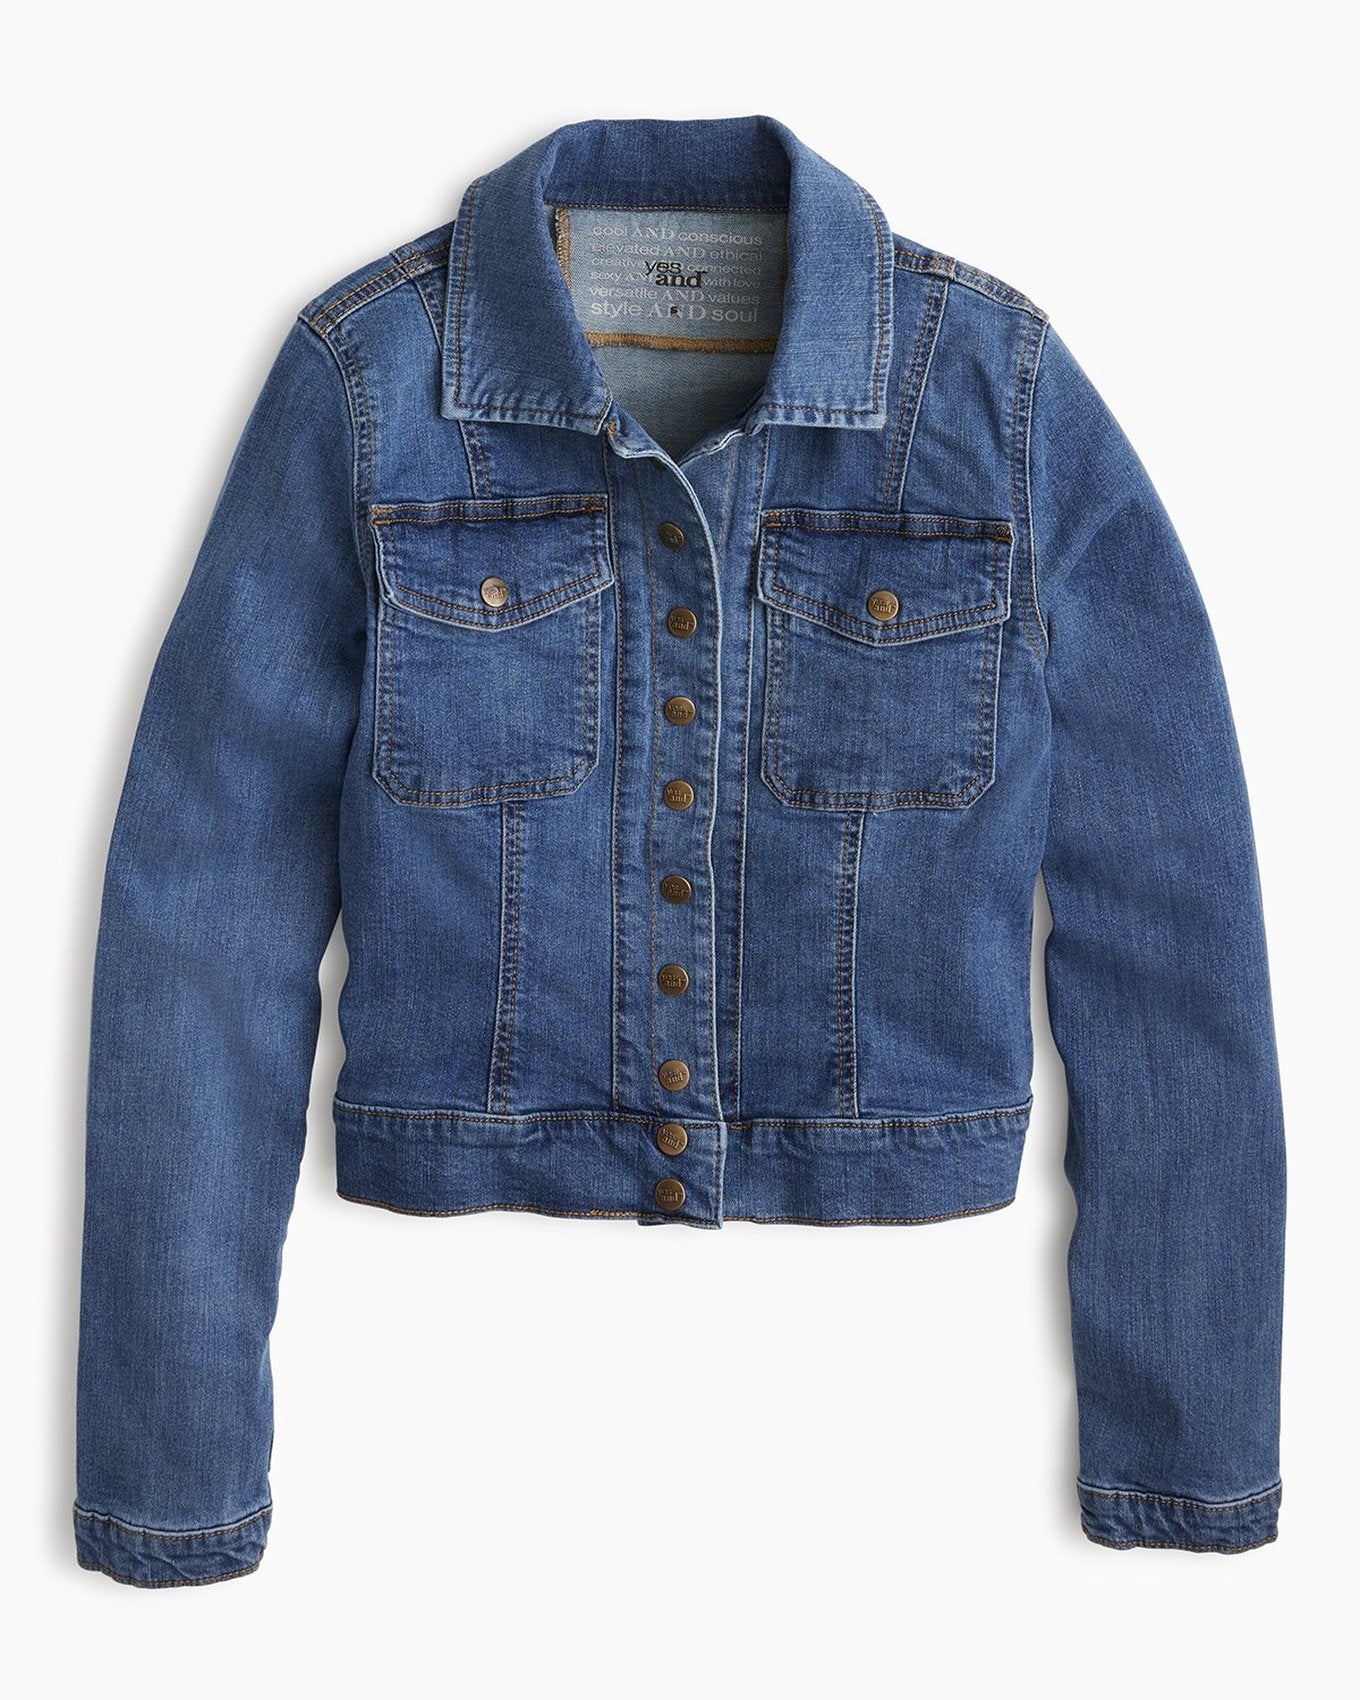 YesAnd Organic Denim Fitted Snap Jacket Jacket in color Denim Light and shape jacket